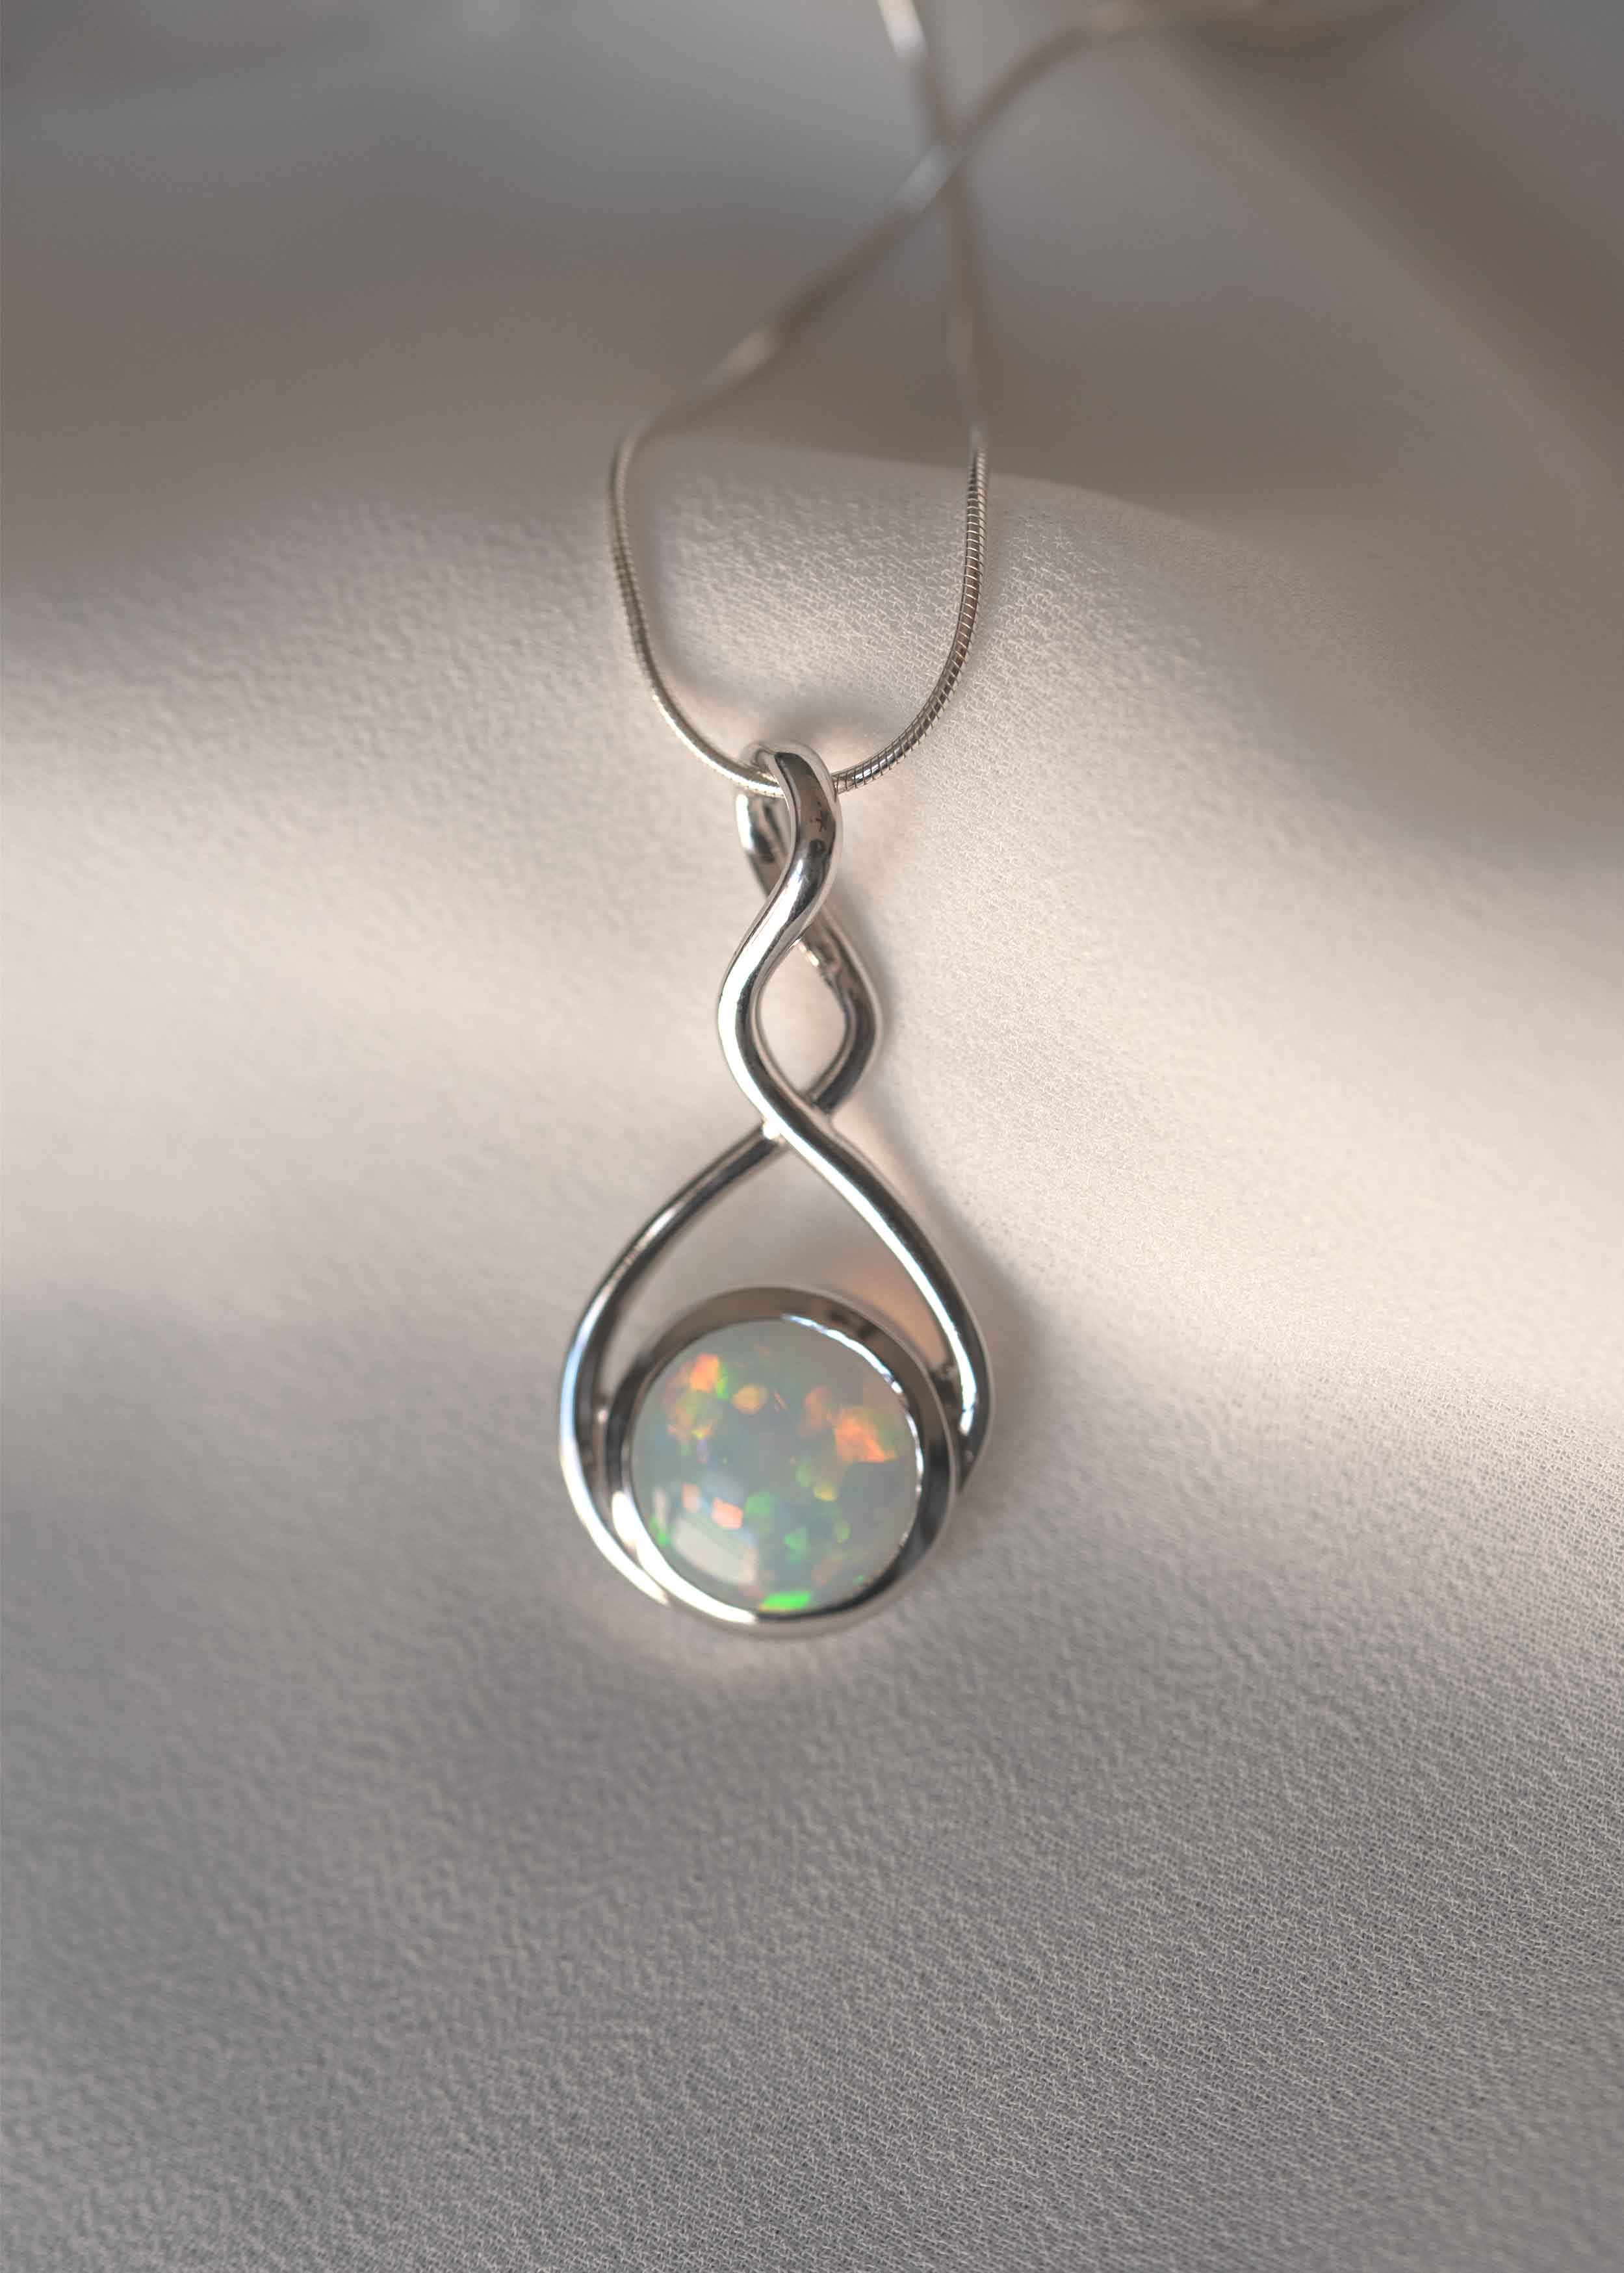 Unique Opal Necklace in sterling silver Best Gifts for Mom Wife Gifts